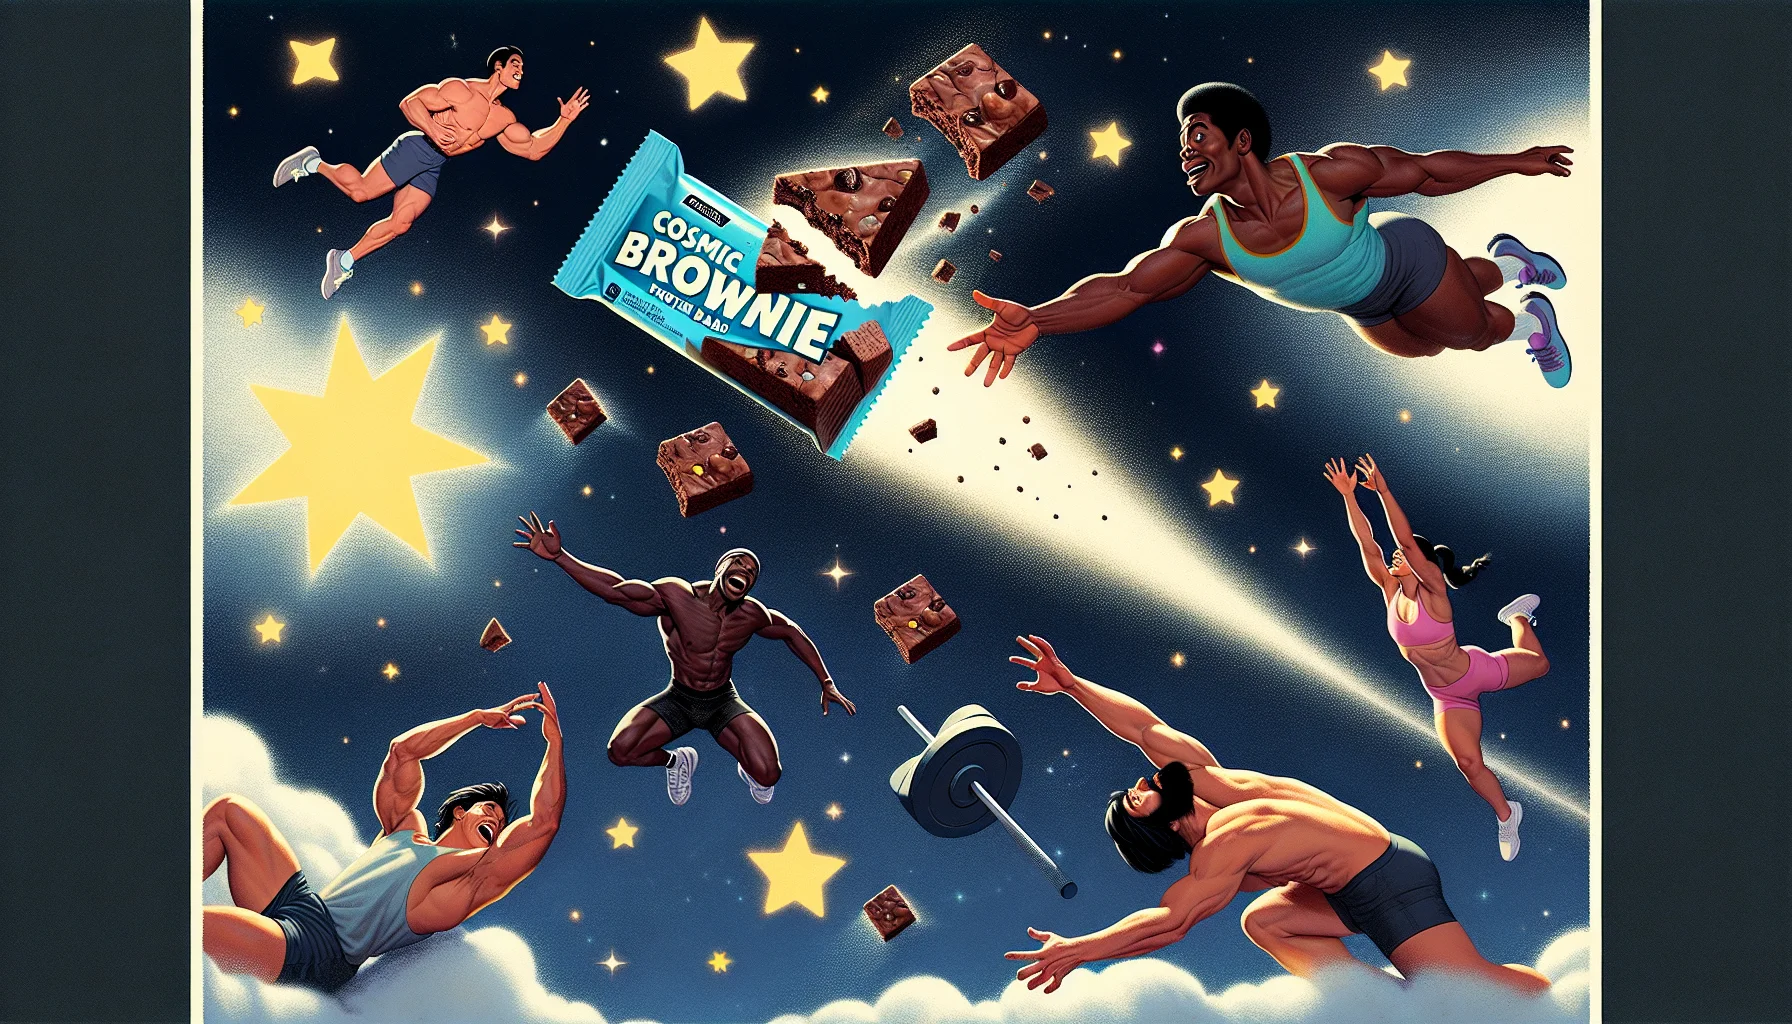 Illustrate a humorous scene in the galaxy where cosmic brownie protein bars are literally shooting out from the stars. Various athletic people are reaching out to grab them, their faces full of delight and determination. Include a male Caucasian runner, a female Black weightlifter, and a Middle-Eastern male yoga practitioner, all in the midst of performing their sport. Make the stars emanate a soft glow, while the protein bars have an inviting shine to them, emphasizing their desirability. The space serves as an allegory for how the right supplements can give athletes the energy they need, represented by the cosmic brownie protein bars.